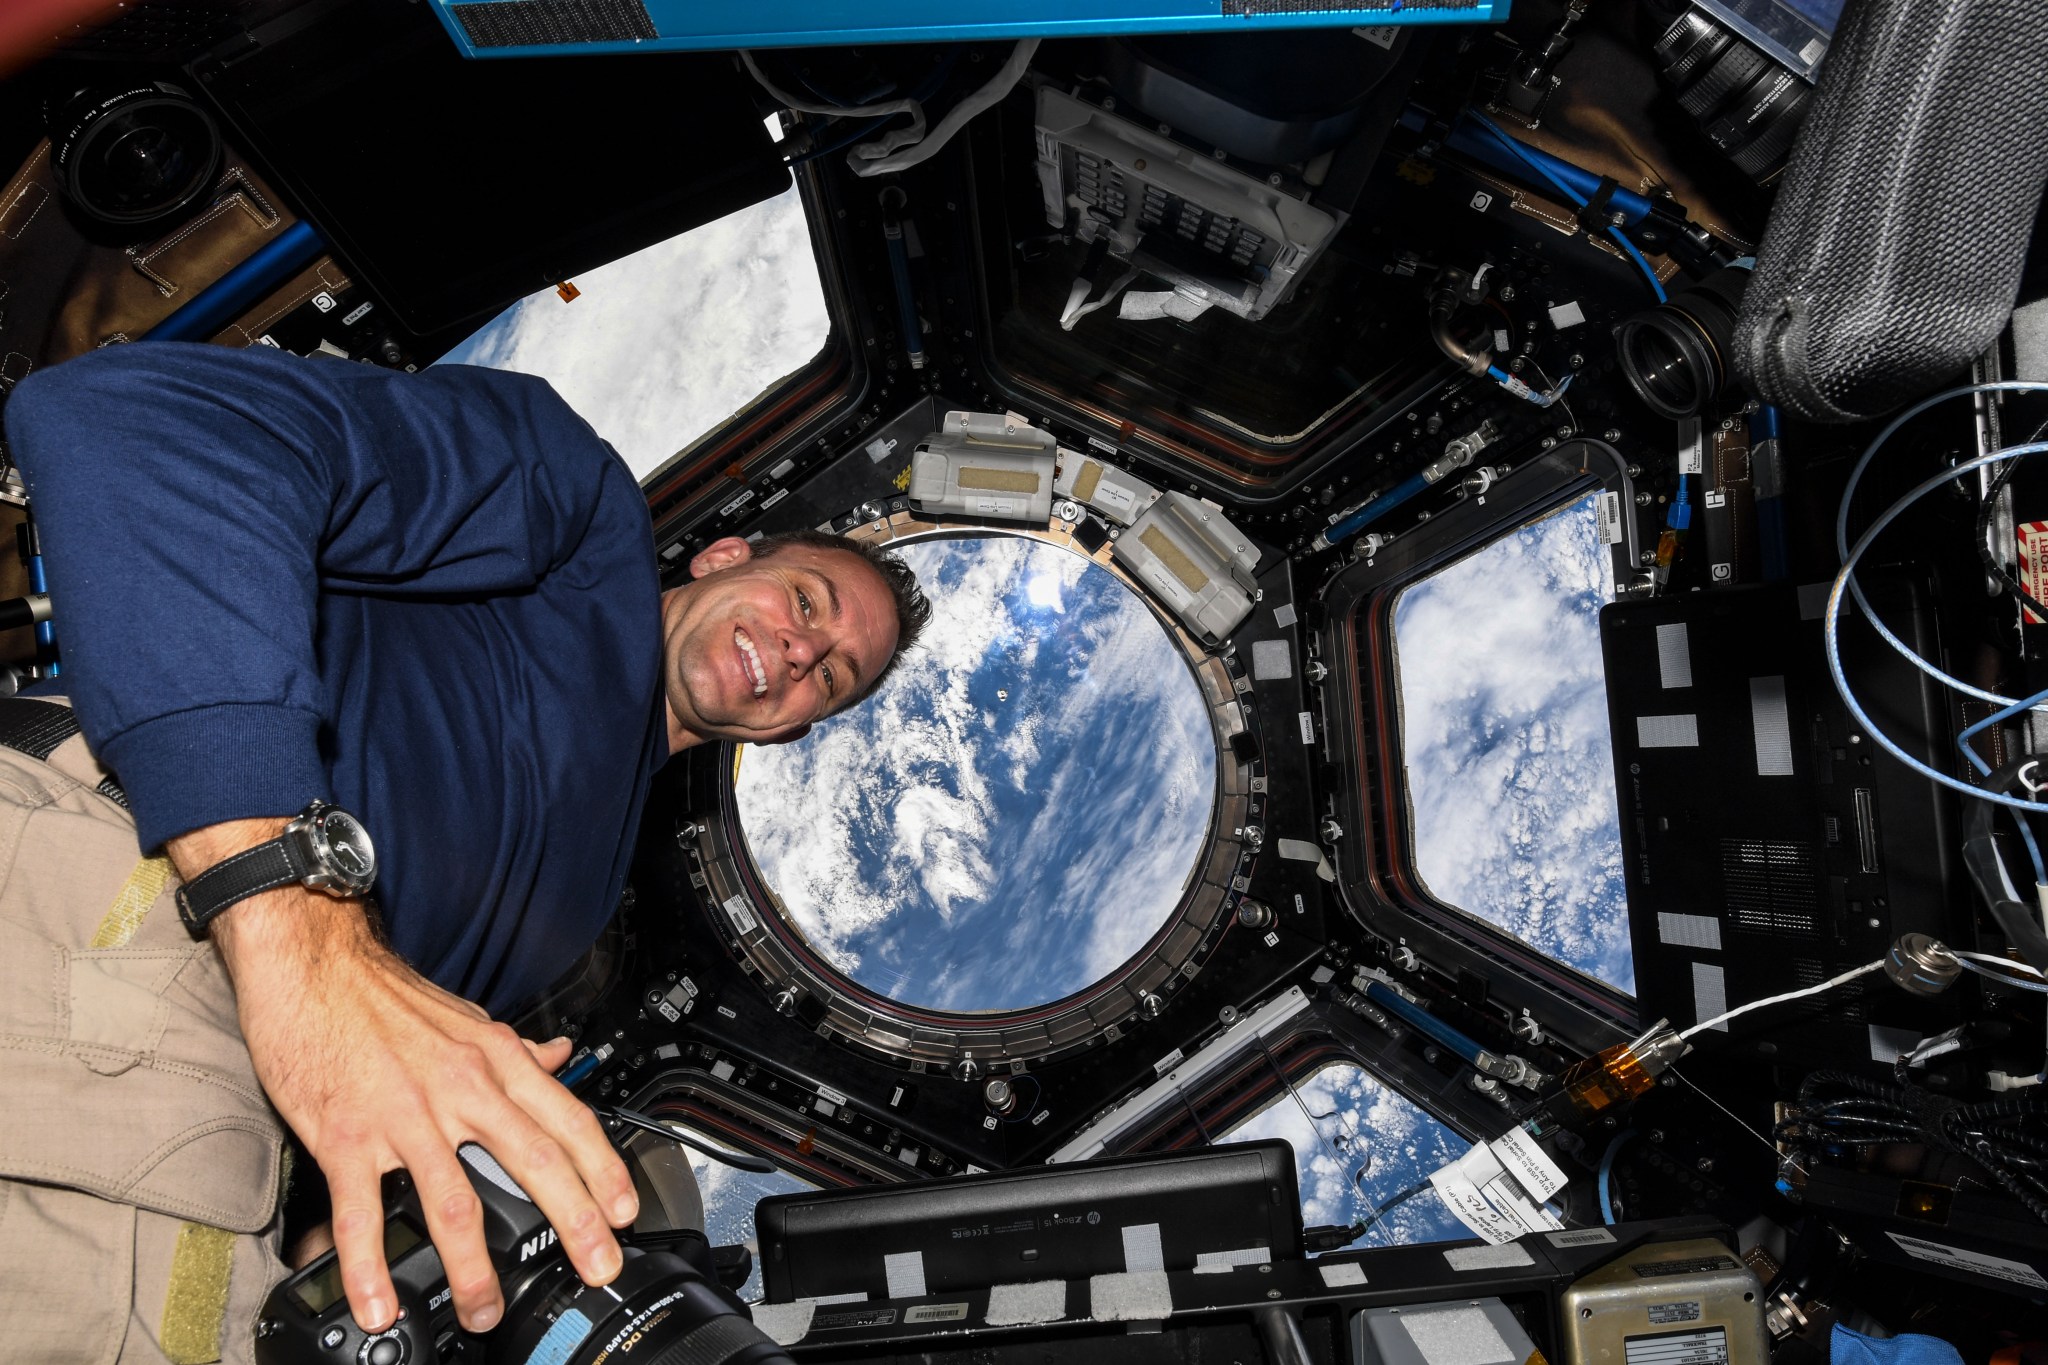 image of an astronaut taking photos inside the cupola of the space station with views of Earth in backdrop